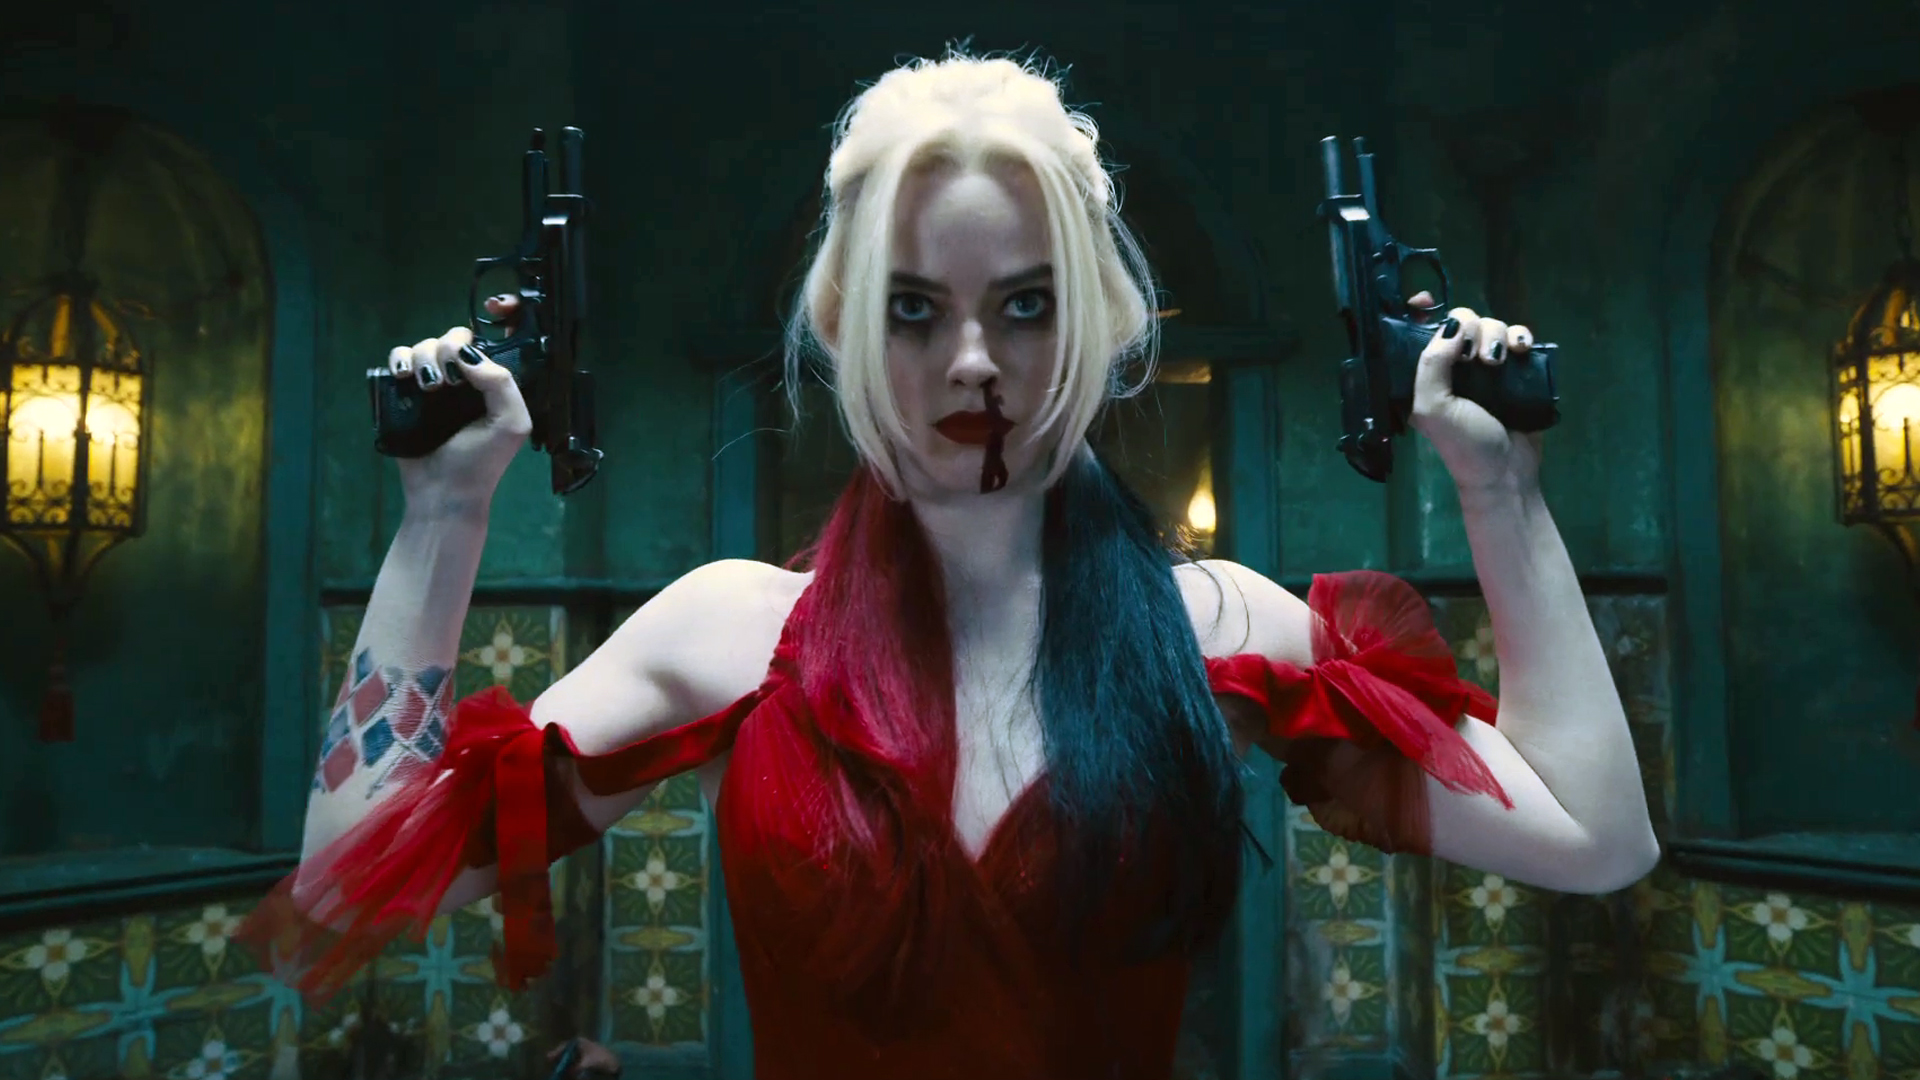 The Suicide Squad (2021): Does Harley Quinn die? - GameRevolution